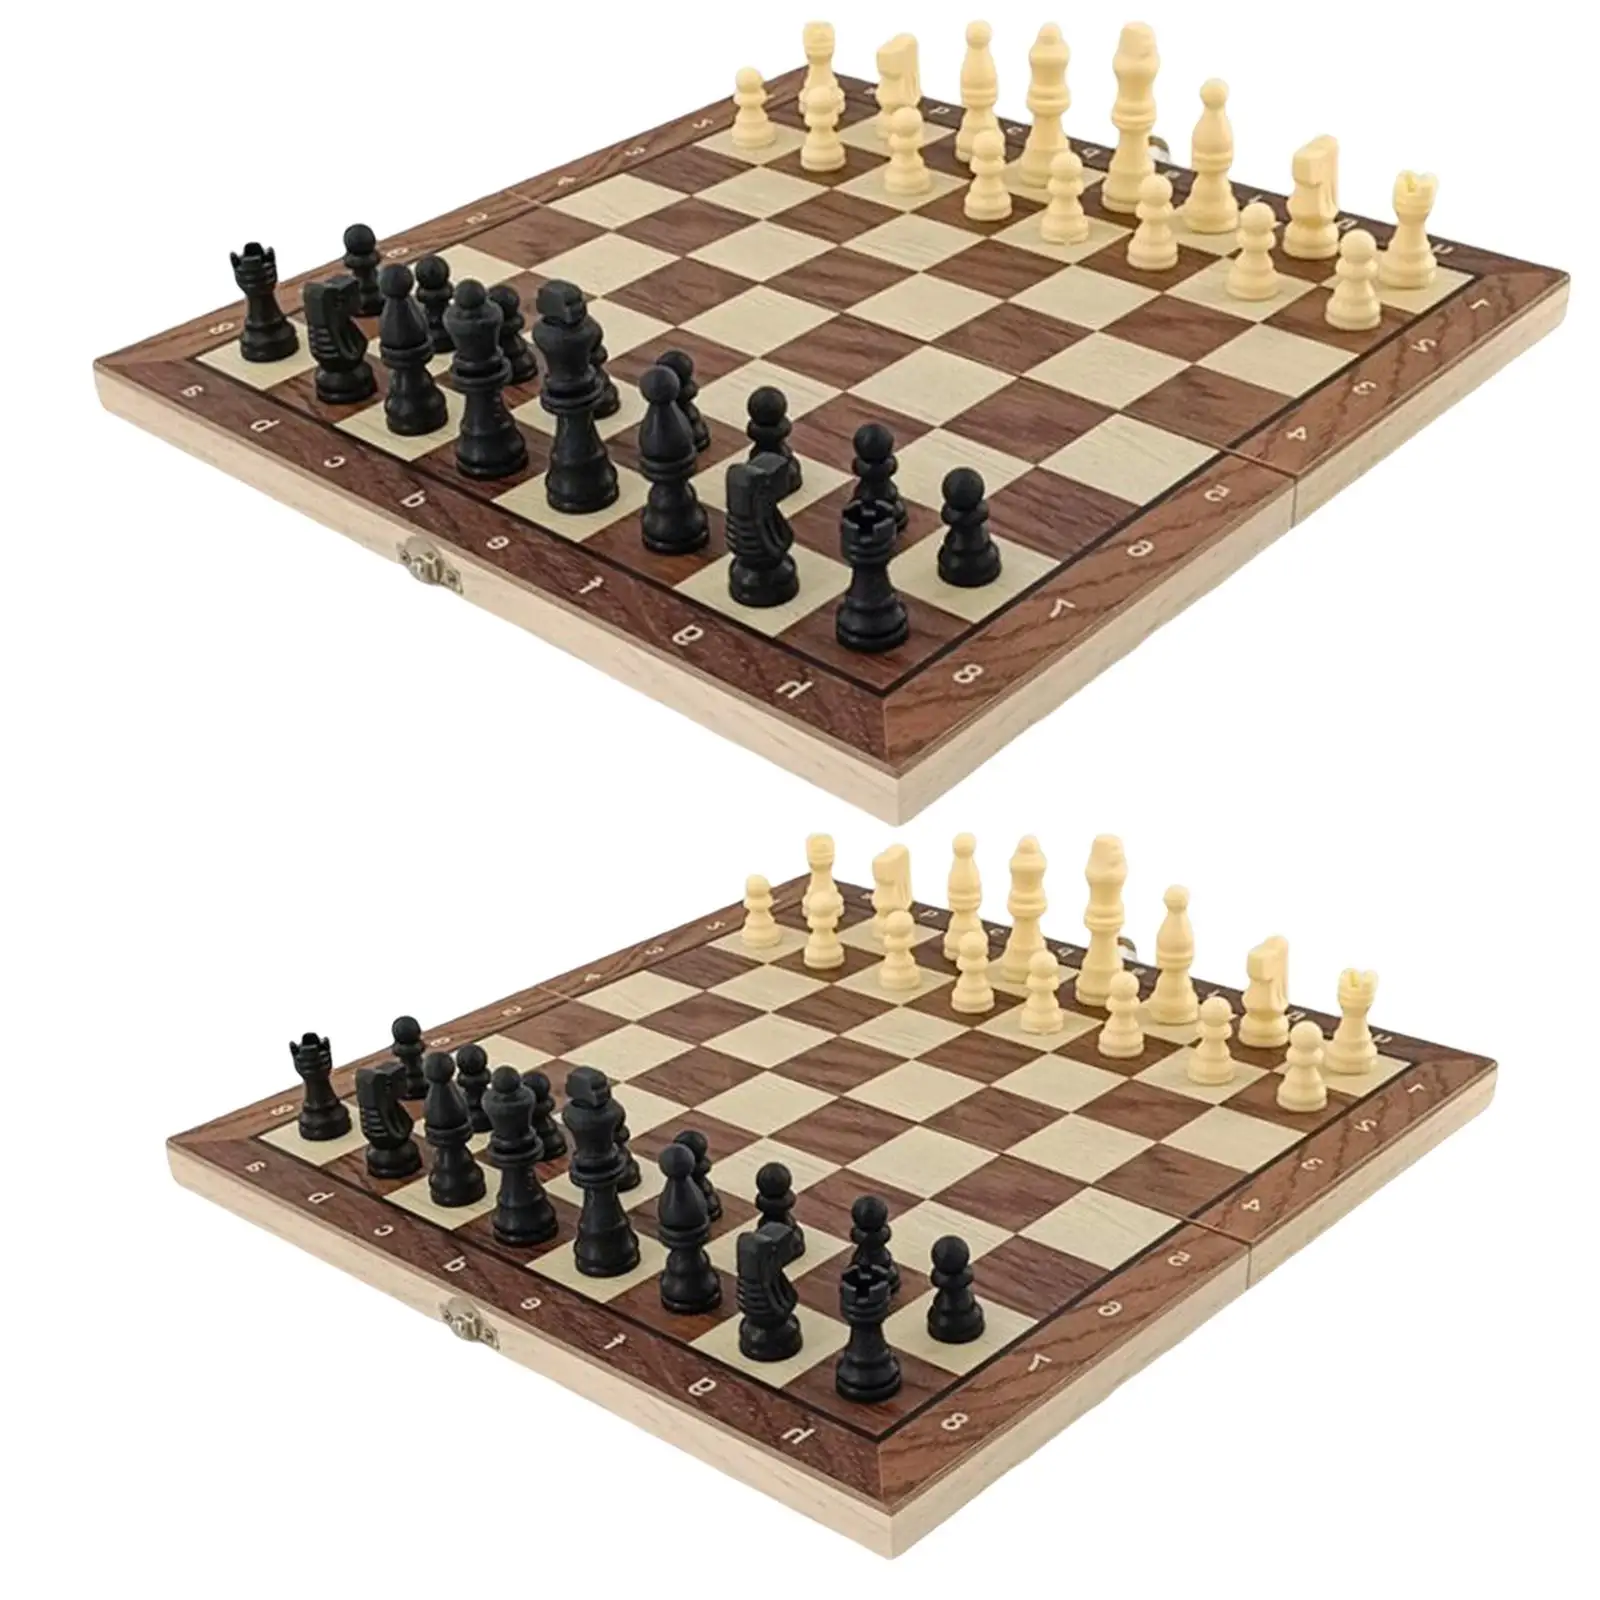 Portable Travel Games Chess Set Entertainment Toys,Chessboard Board Game,Wooden